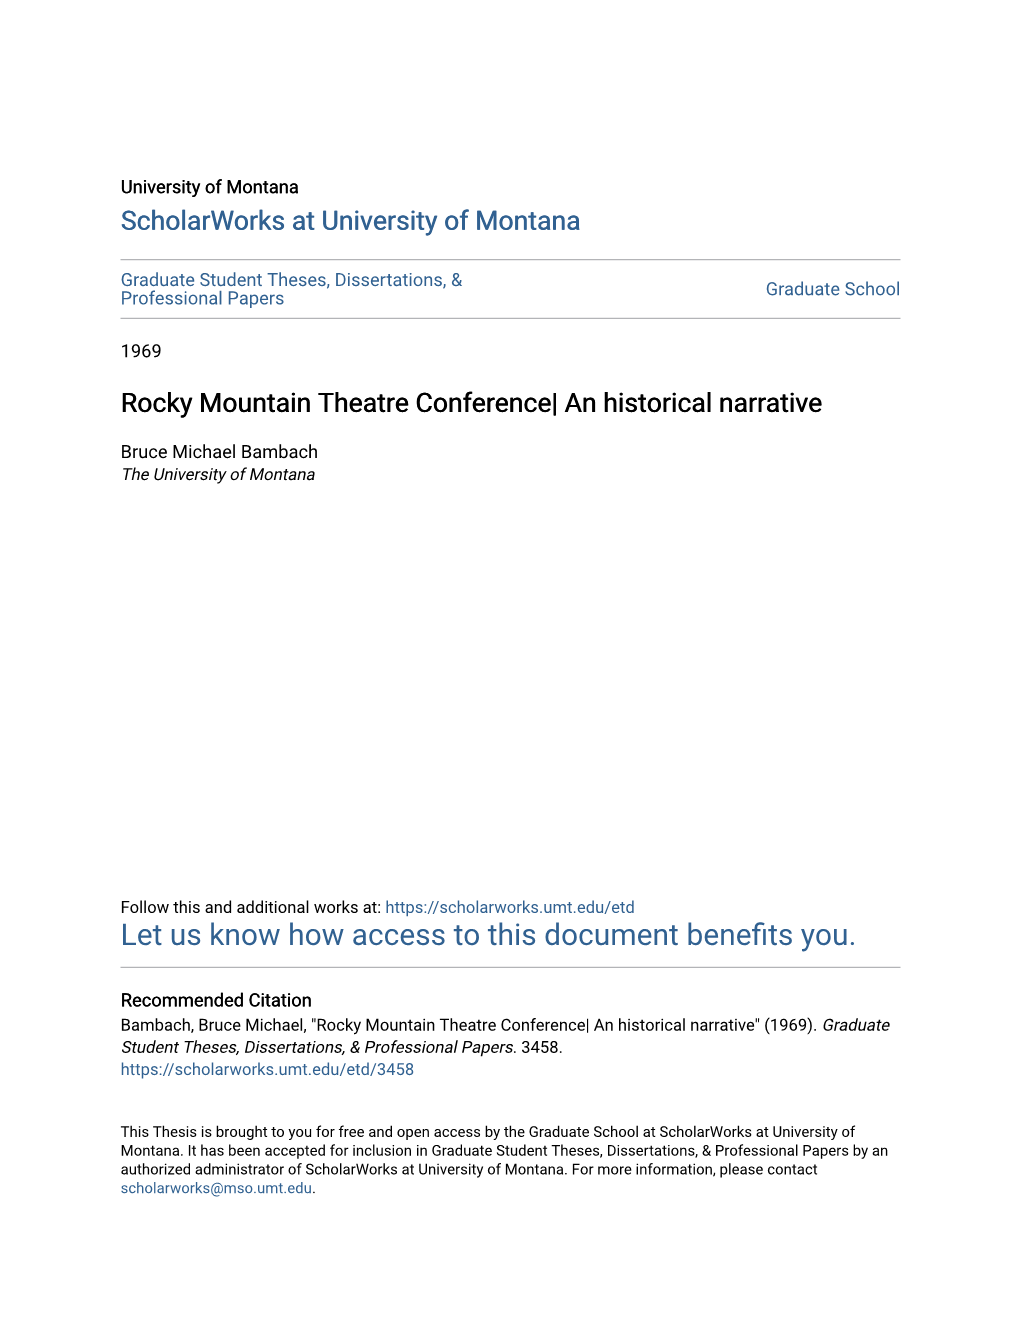 Rocky Mountain Theatre Conference| an Historical Narrative